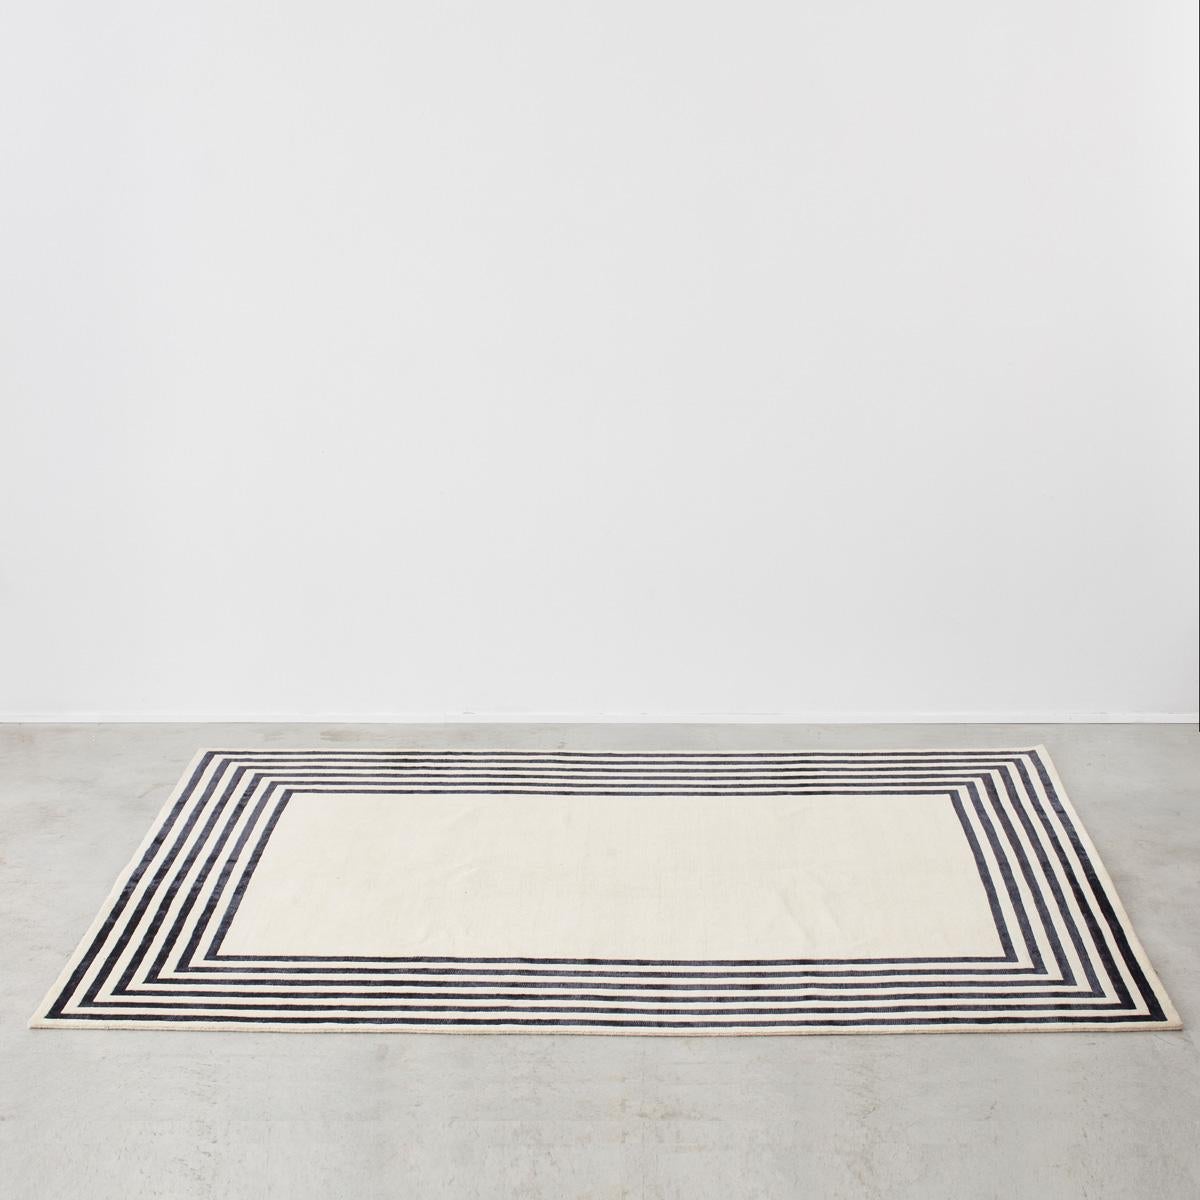 A restrained monochromatic carpet with recursive black geometric pattern. Ideal for minimalist interiors. Sourced in Italy, most likely handwoven in Indo-Nepal. Material: wool.

Price includes VAT, not applicable for export sales (we ship from the